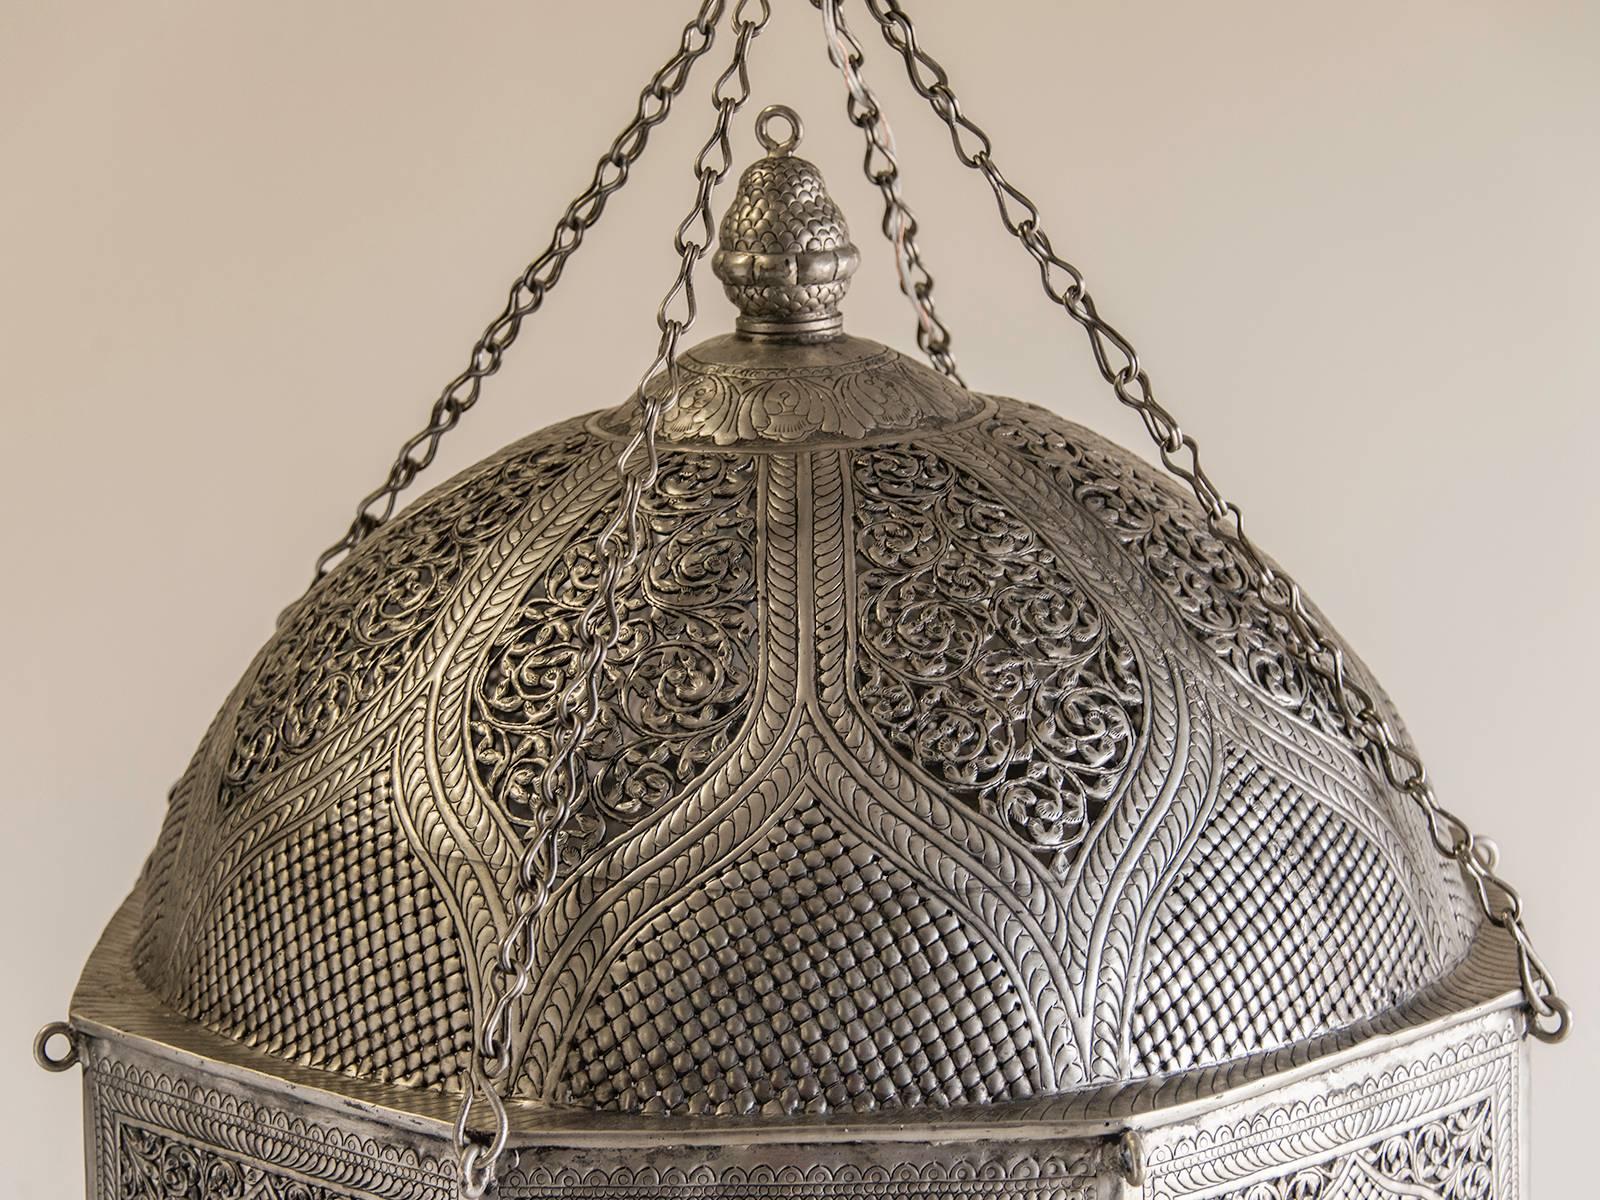 Receive our new selections direct from 1stdibs by email each week. Please click follow dealer below and see them first!

This enormous Indian lantern has six sides topped by a dome and is suspended from chains. The pattern is one of open work